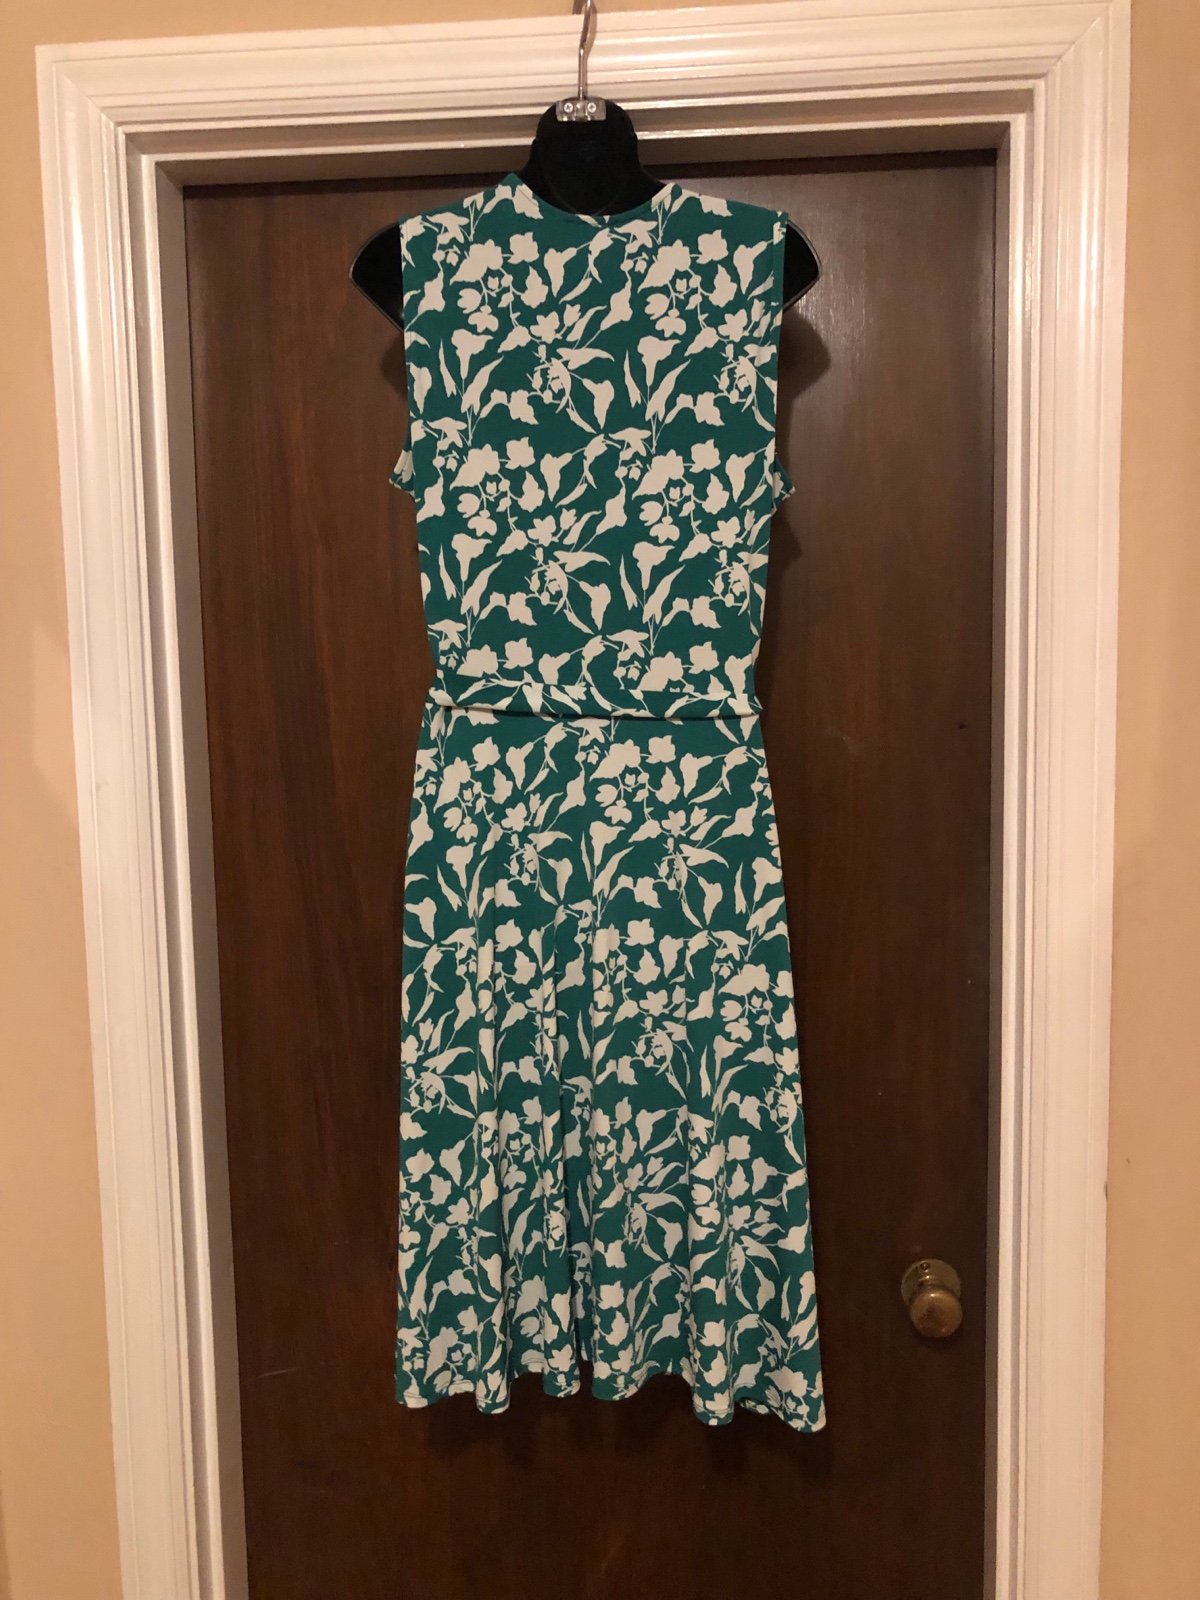 Special offer  Leota Floral Dress - size L - 42” in length pI6qSpiym Buying Cheap